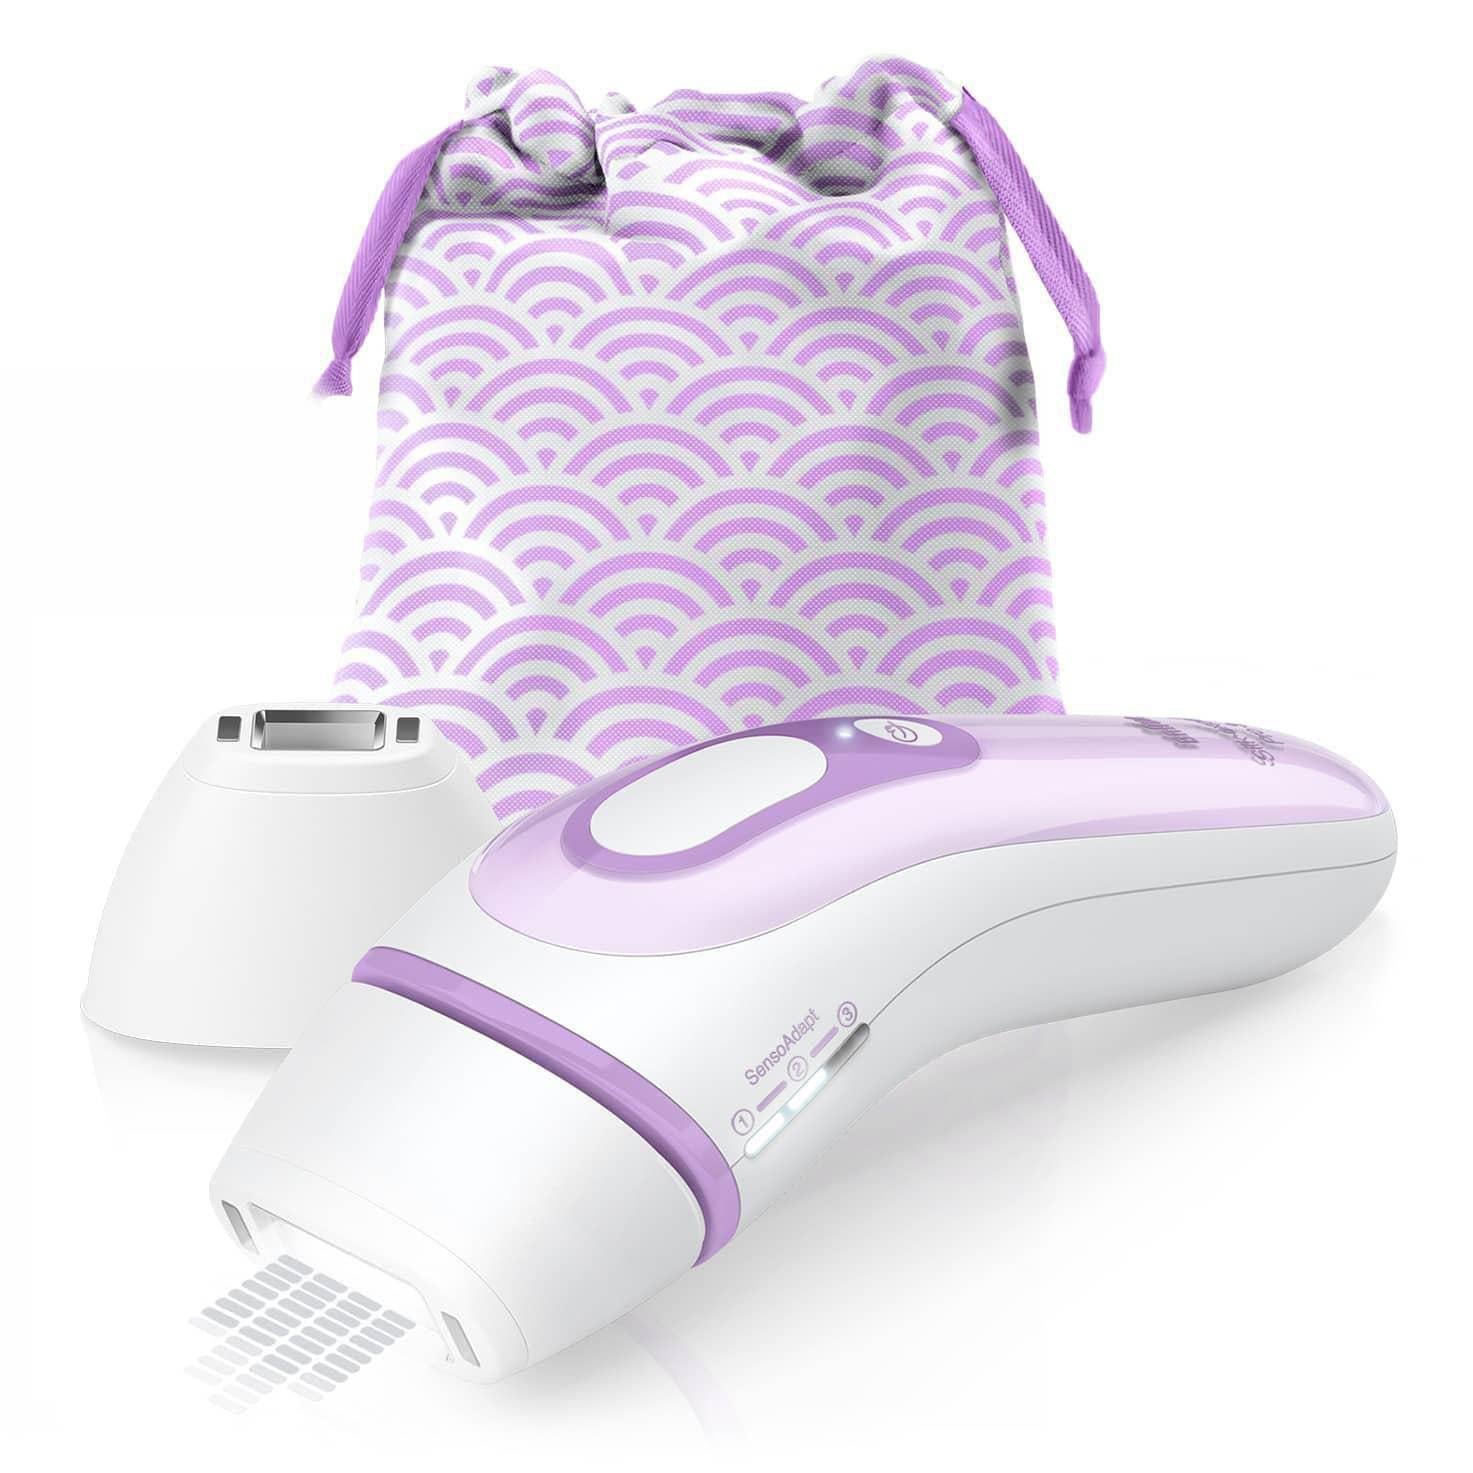 Braun Women's Silk-Expert Pro 3 PL3132 IPL Hair Removal with 3 Extras, White/Lilac - Healthxpress.ie